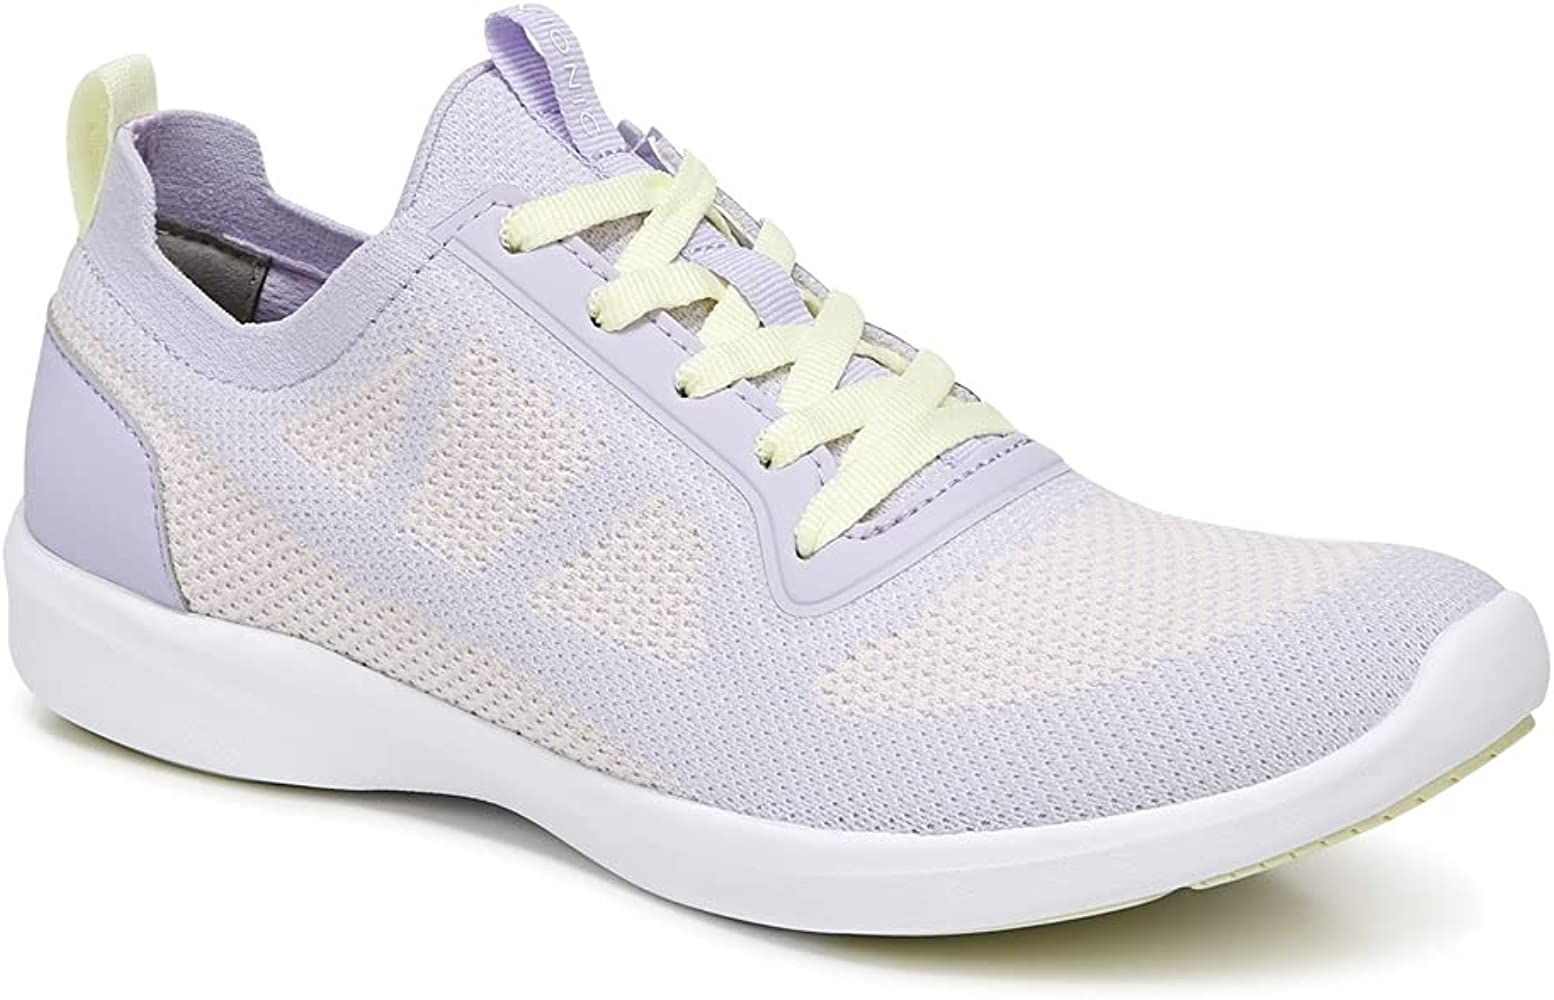 Vionic Women's Sky Lenora Leisure Shoes- Supportive Walking Shoes That Include Three-Zone Comfort... | Amazon (US)